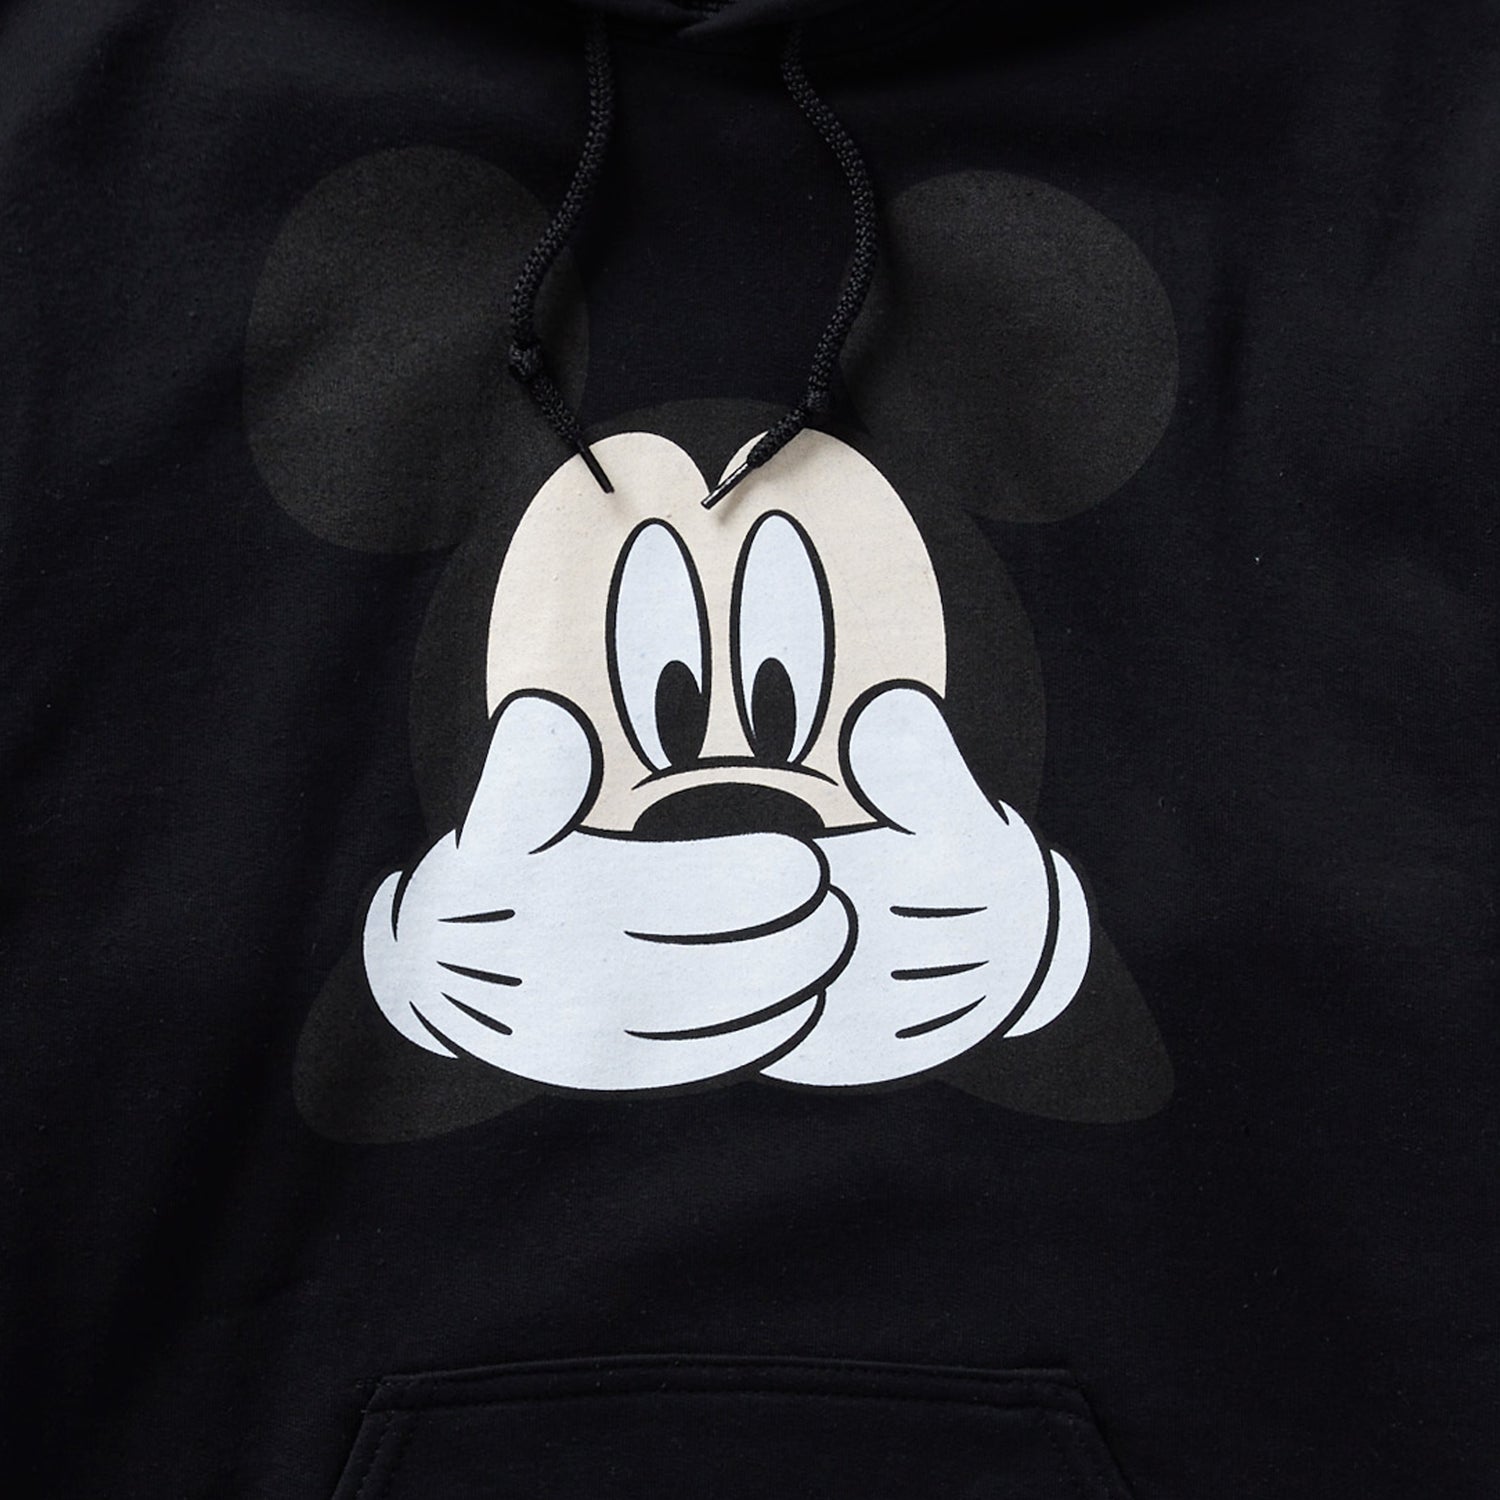 MICKEY MOUSE UH OH PULLOVER HOODIE - BLACK